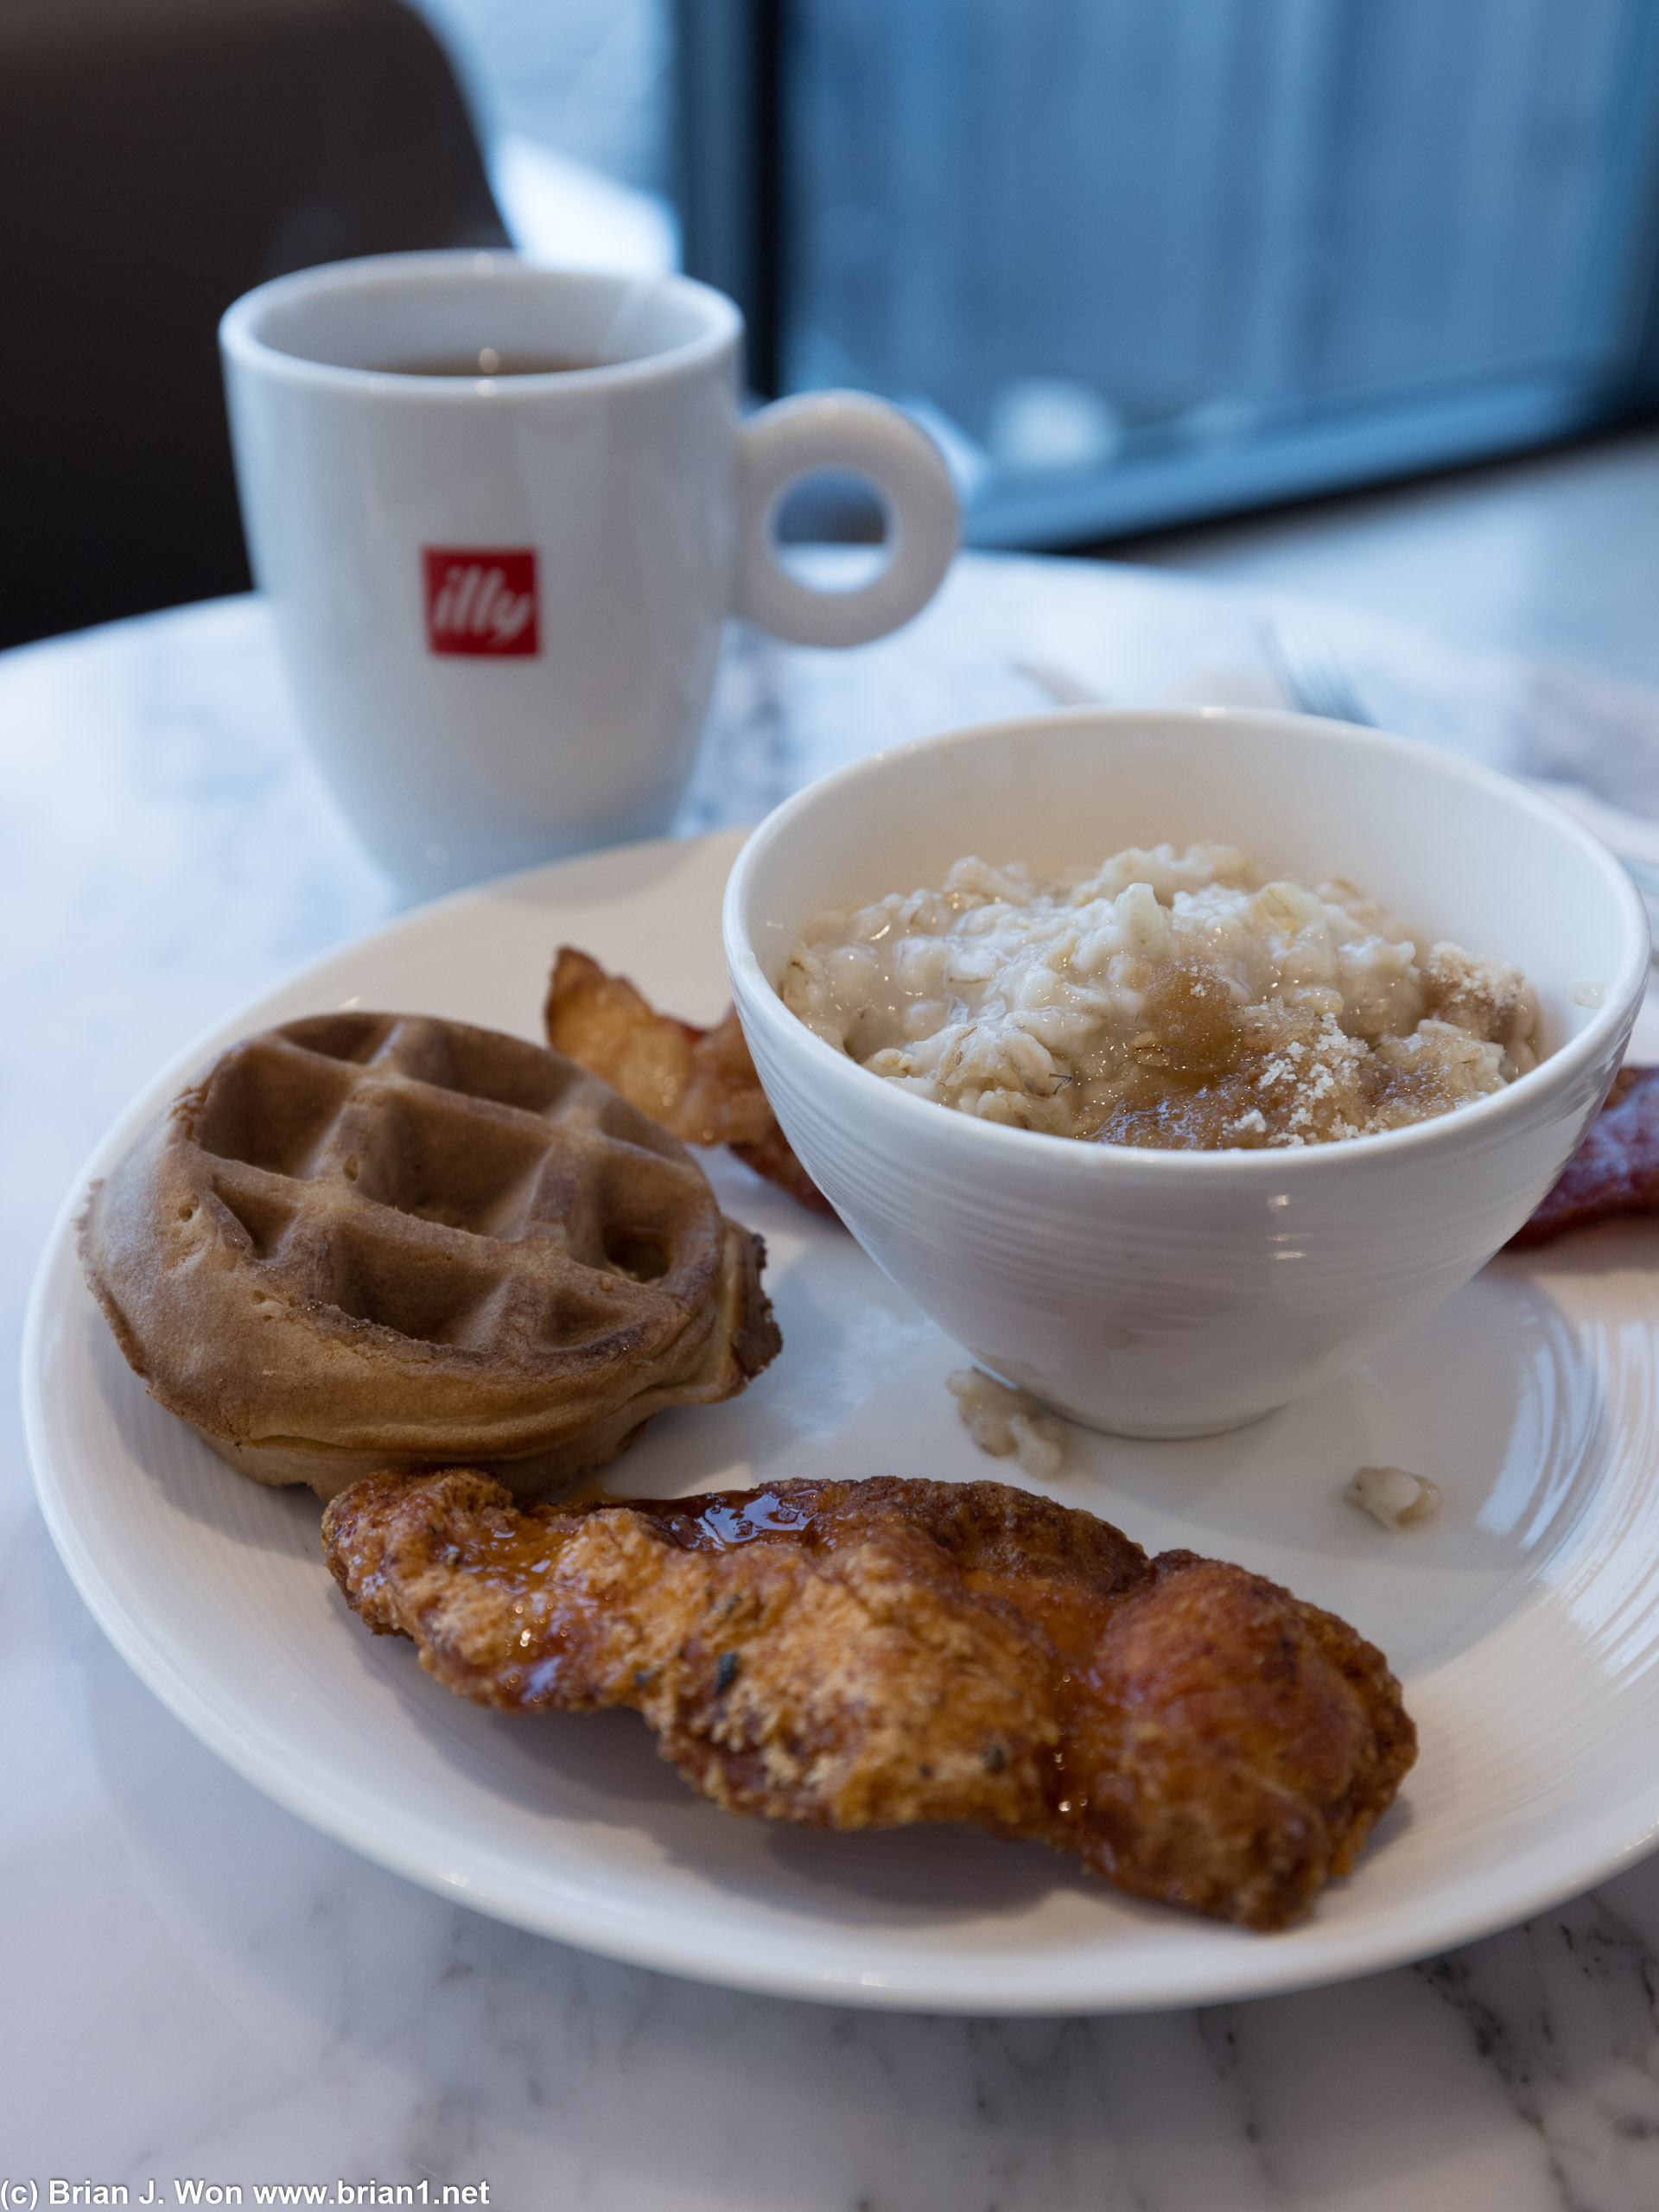 Decided on oatmeal, fried chicken, and a waffle. One of each.